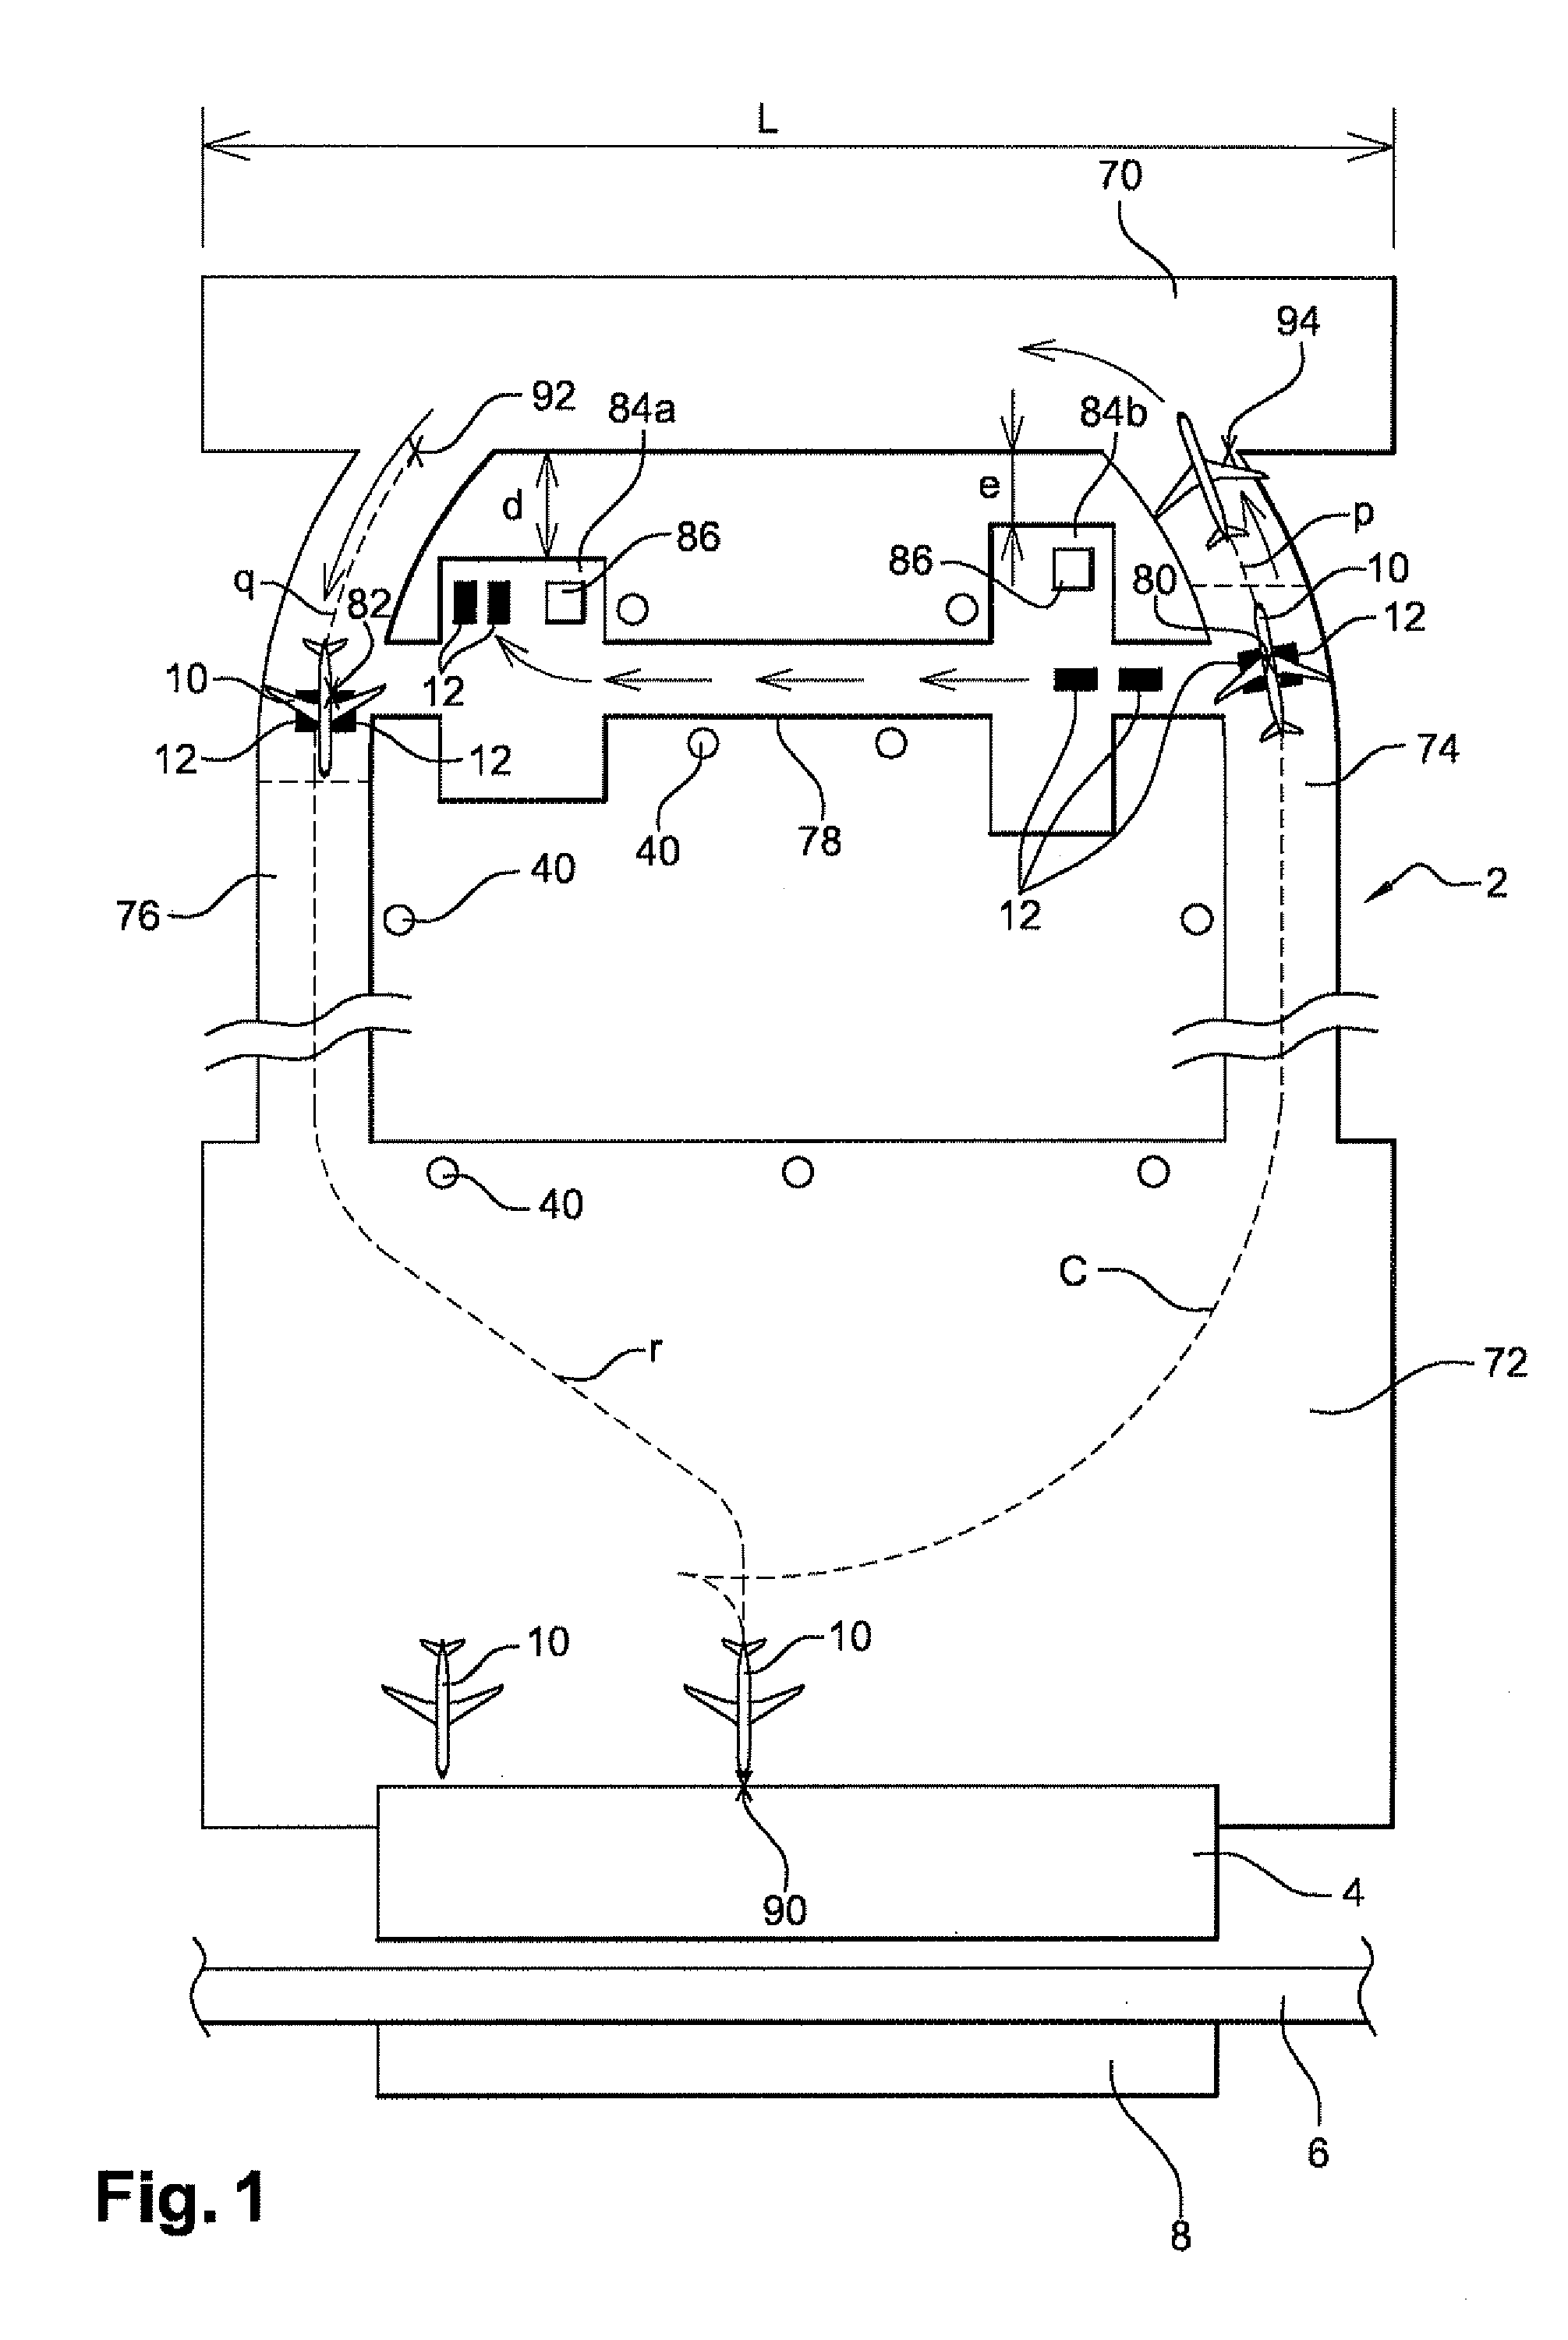 Method for moving an aircraft along the ground